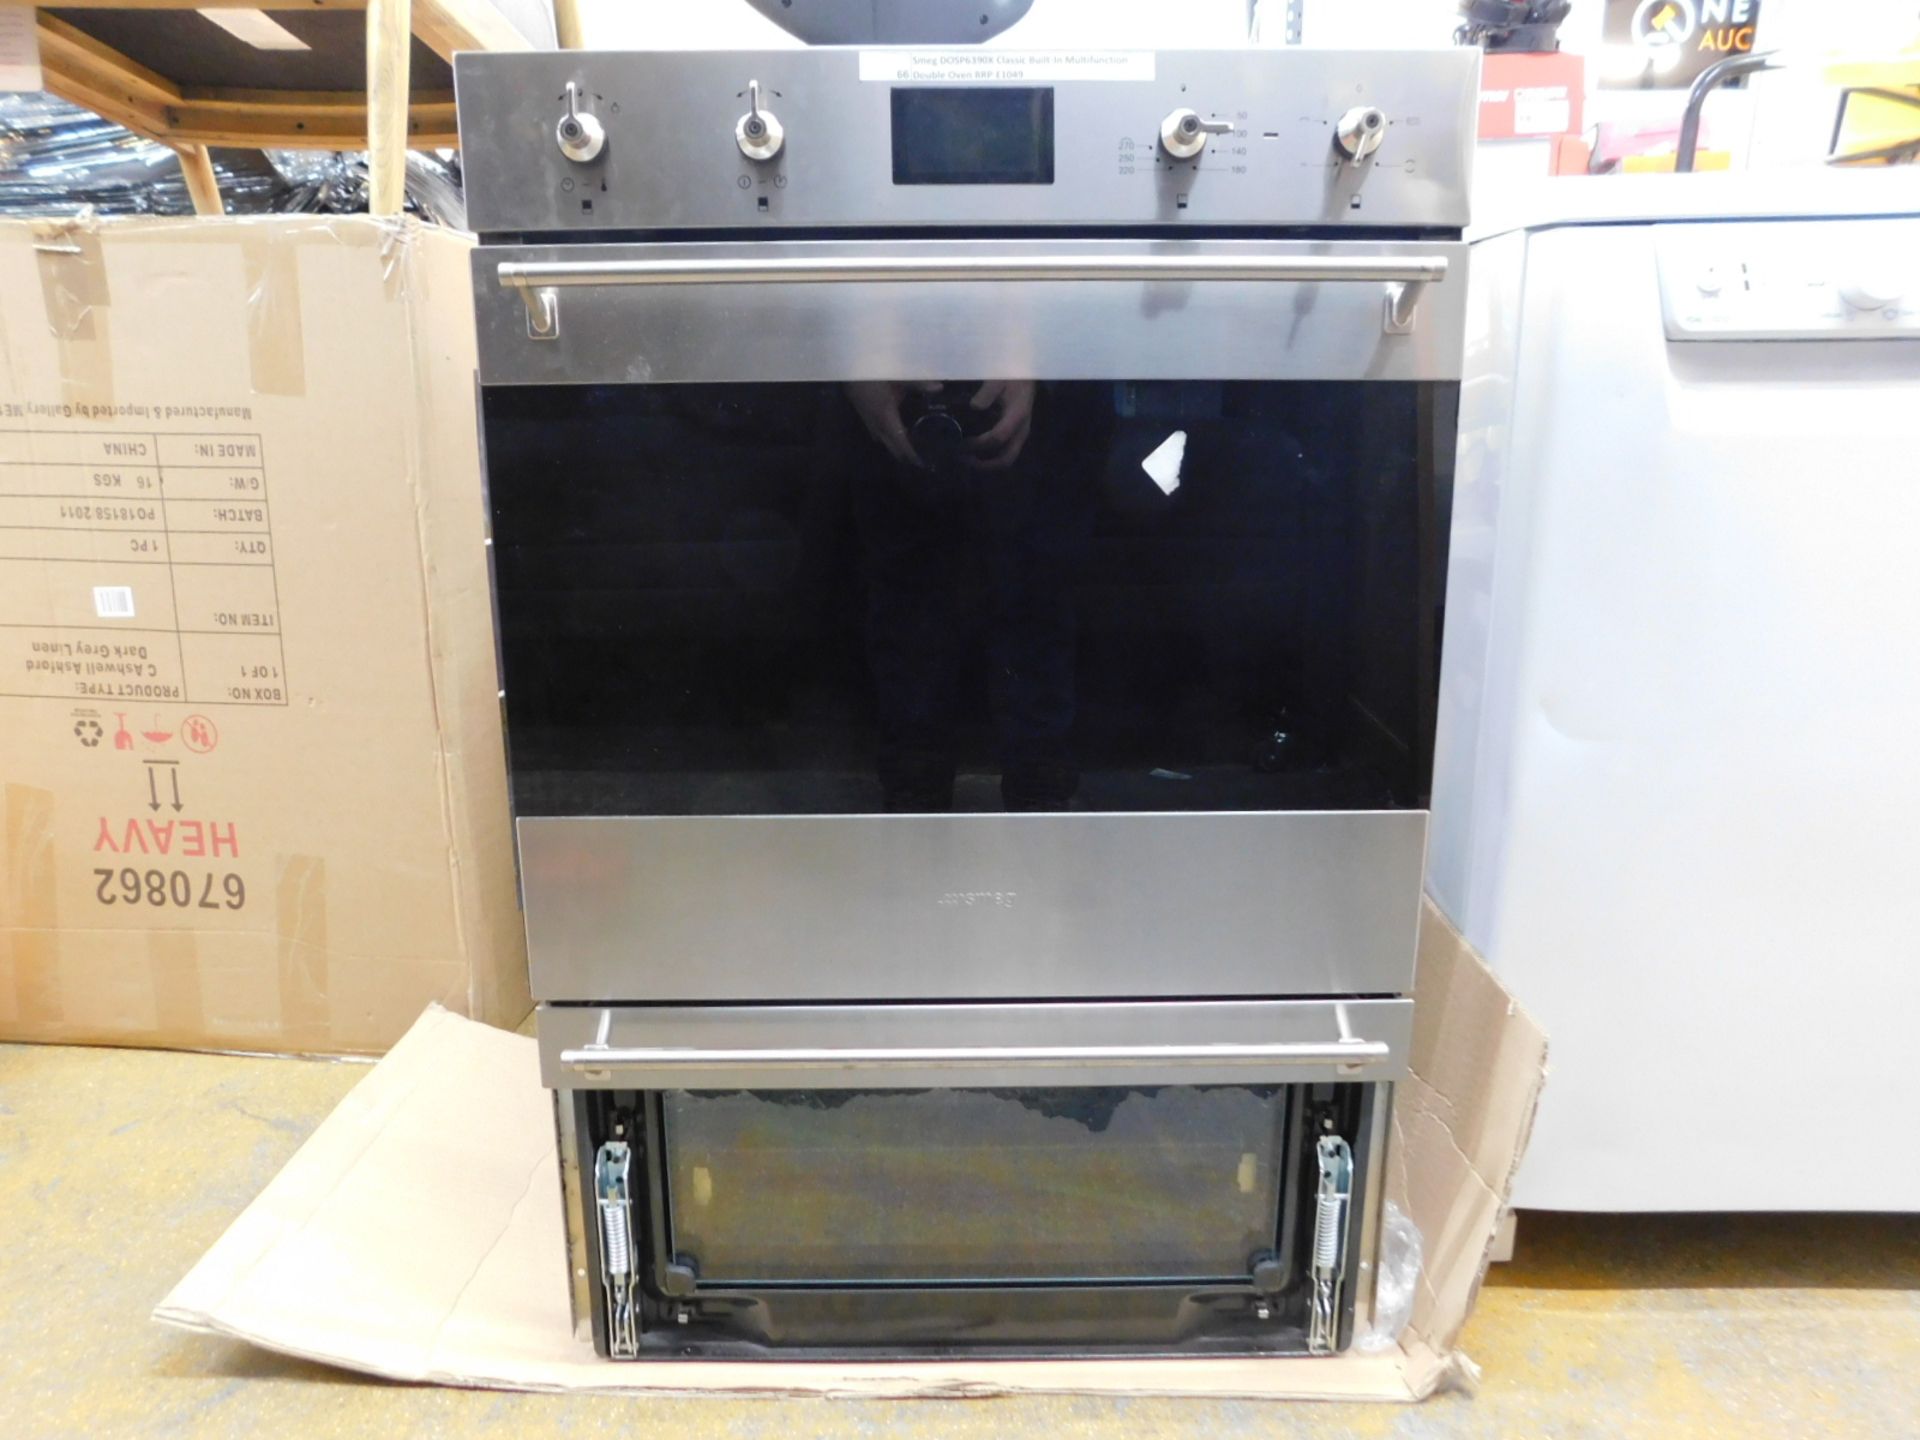 1 SMEG CLASSIC DOSP6390X ELECTRIC DOUBLE OVEN RRP Â£1199 [MPS] (HEAVILY USED, 1 SWITCH IS LOOSE,